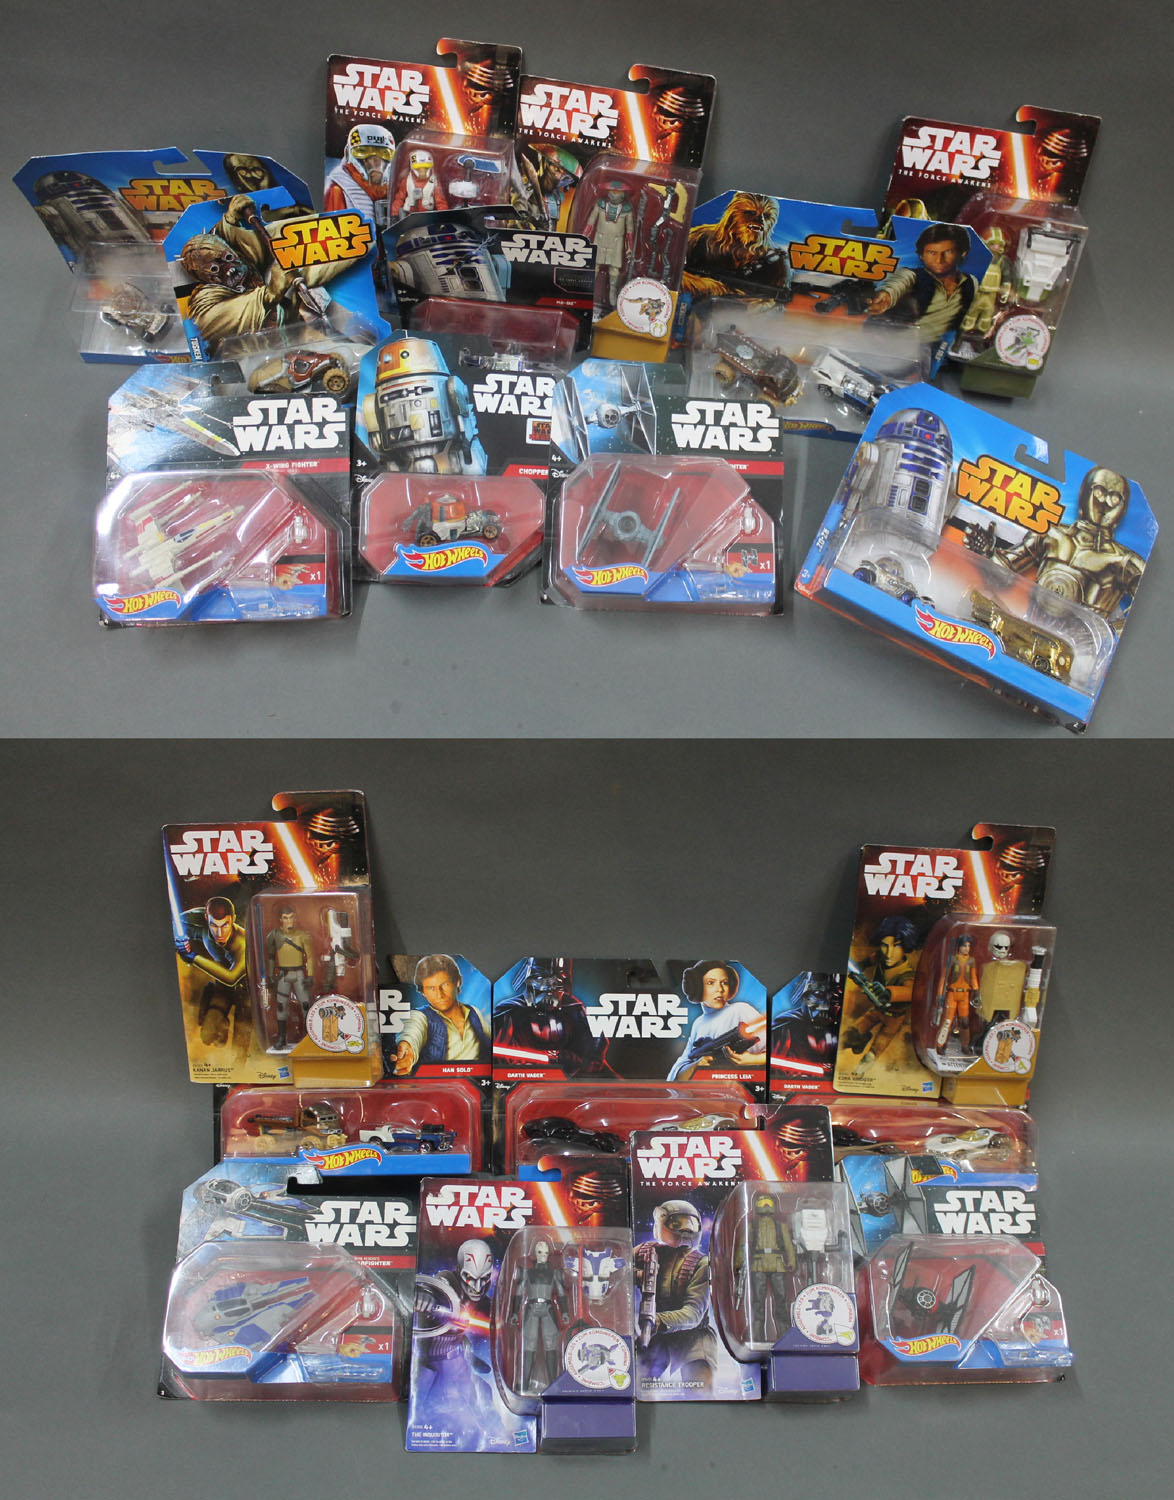 20 boxed Disney Star Wars action figures and vehicles